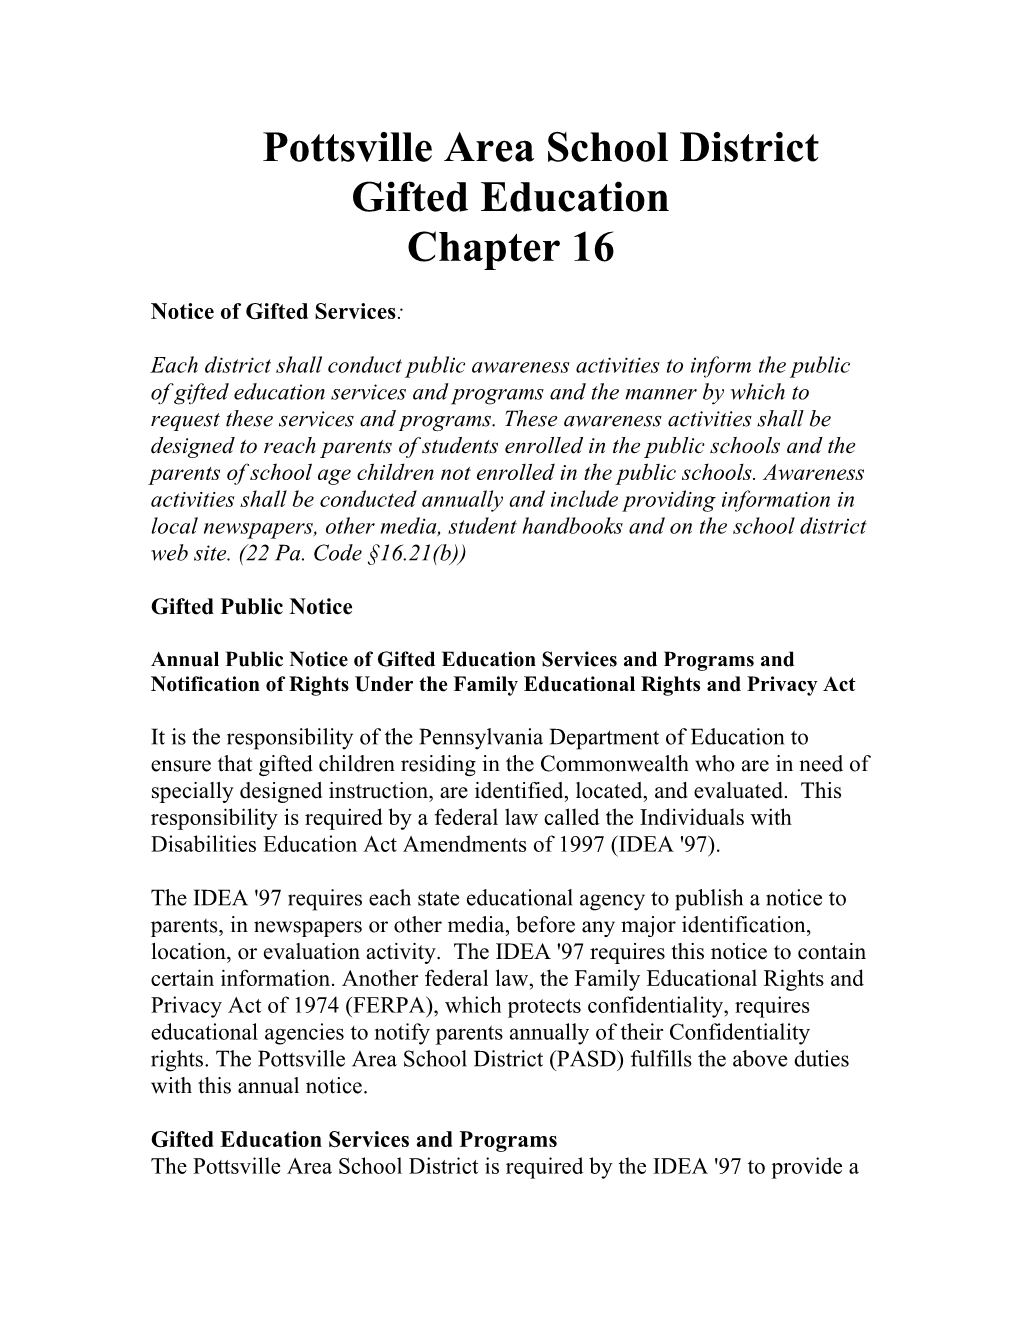 Pottsville Area School District - Gifted Education